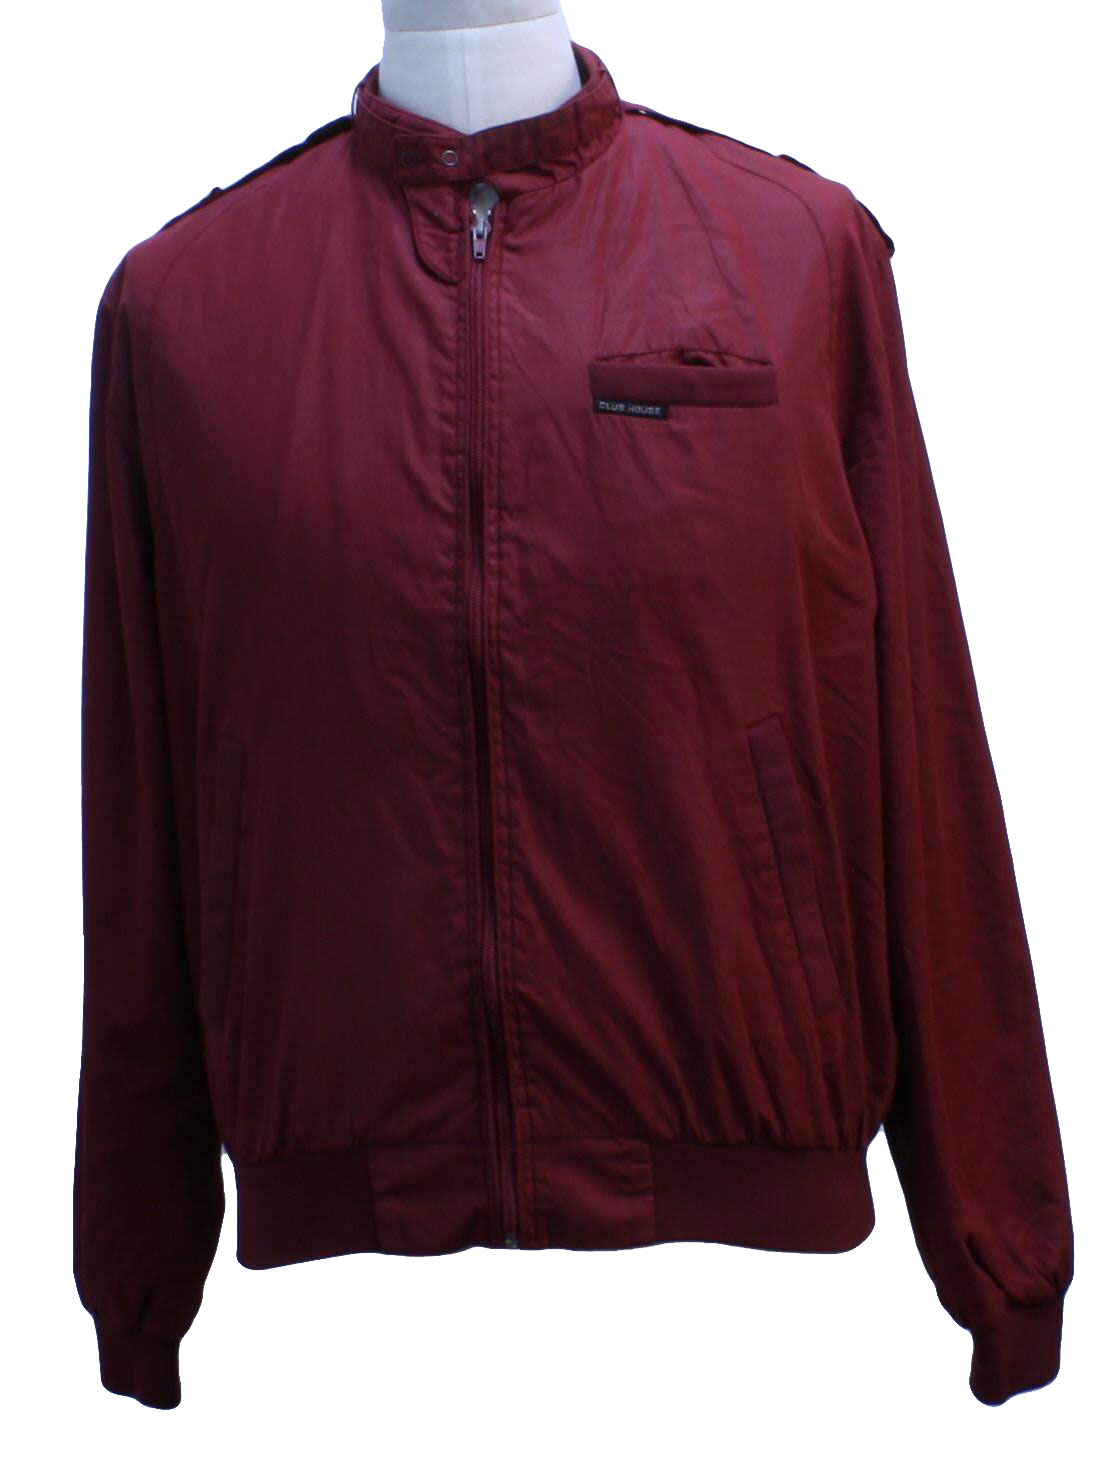 80s Jacket (Club House): 80s -Club House- Mens maroon cotton polyester ...